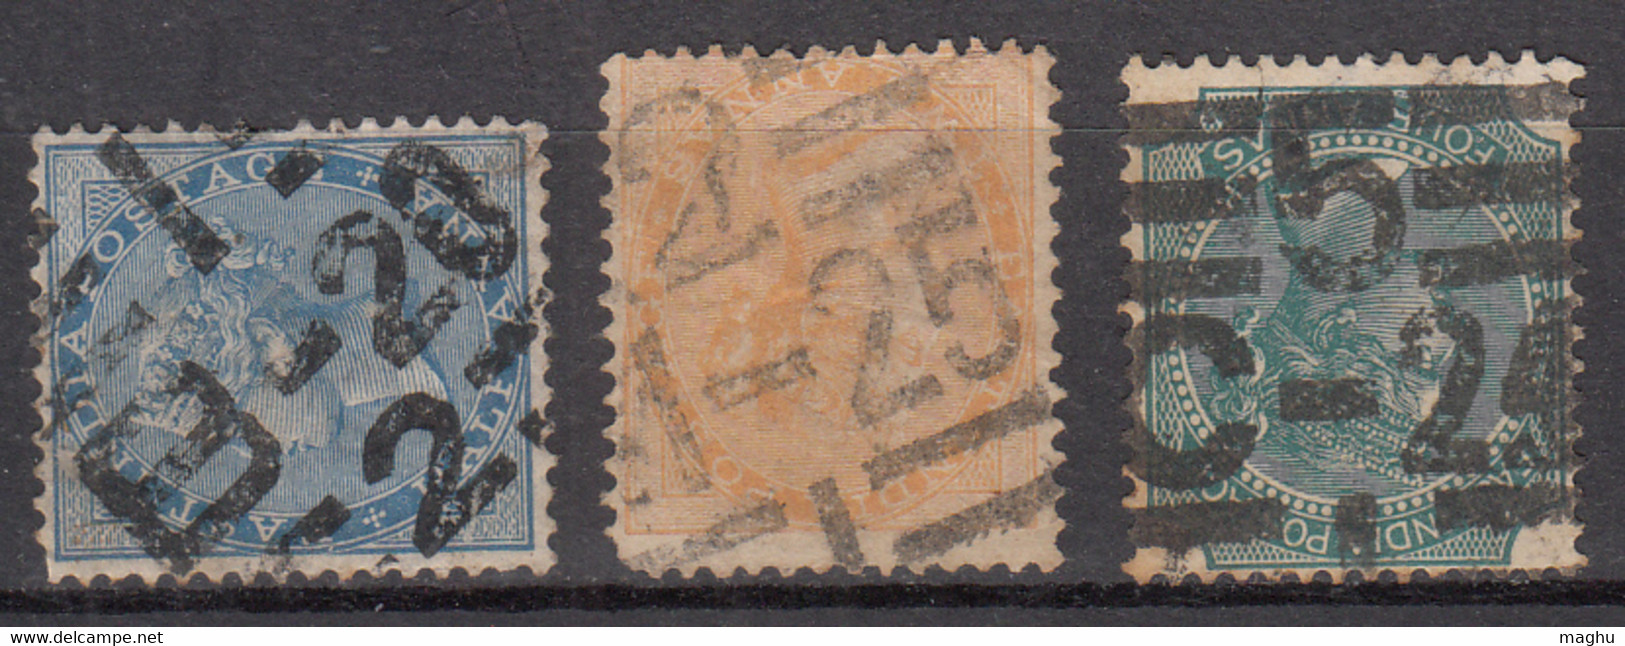 3 Diff., Cancellation Of  JC Type 32a / Martin 17b, QV British East India India Used, Early Indian Cancellation - 1854 East India Company Administration